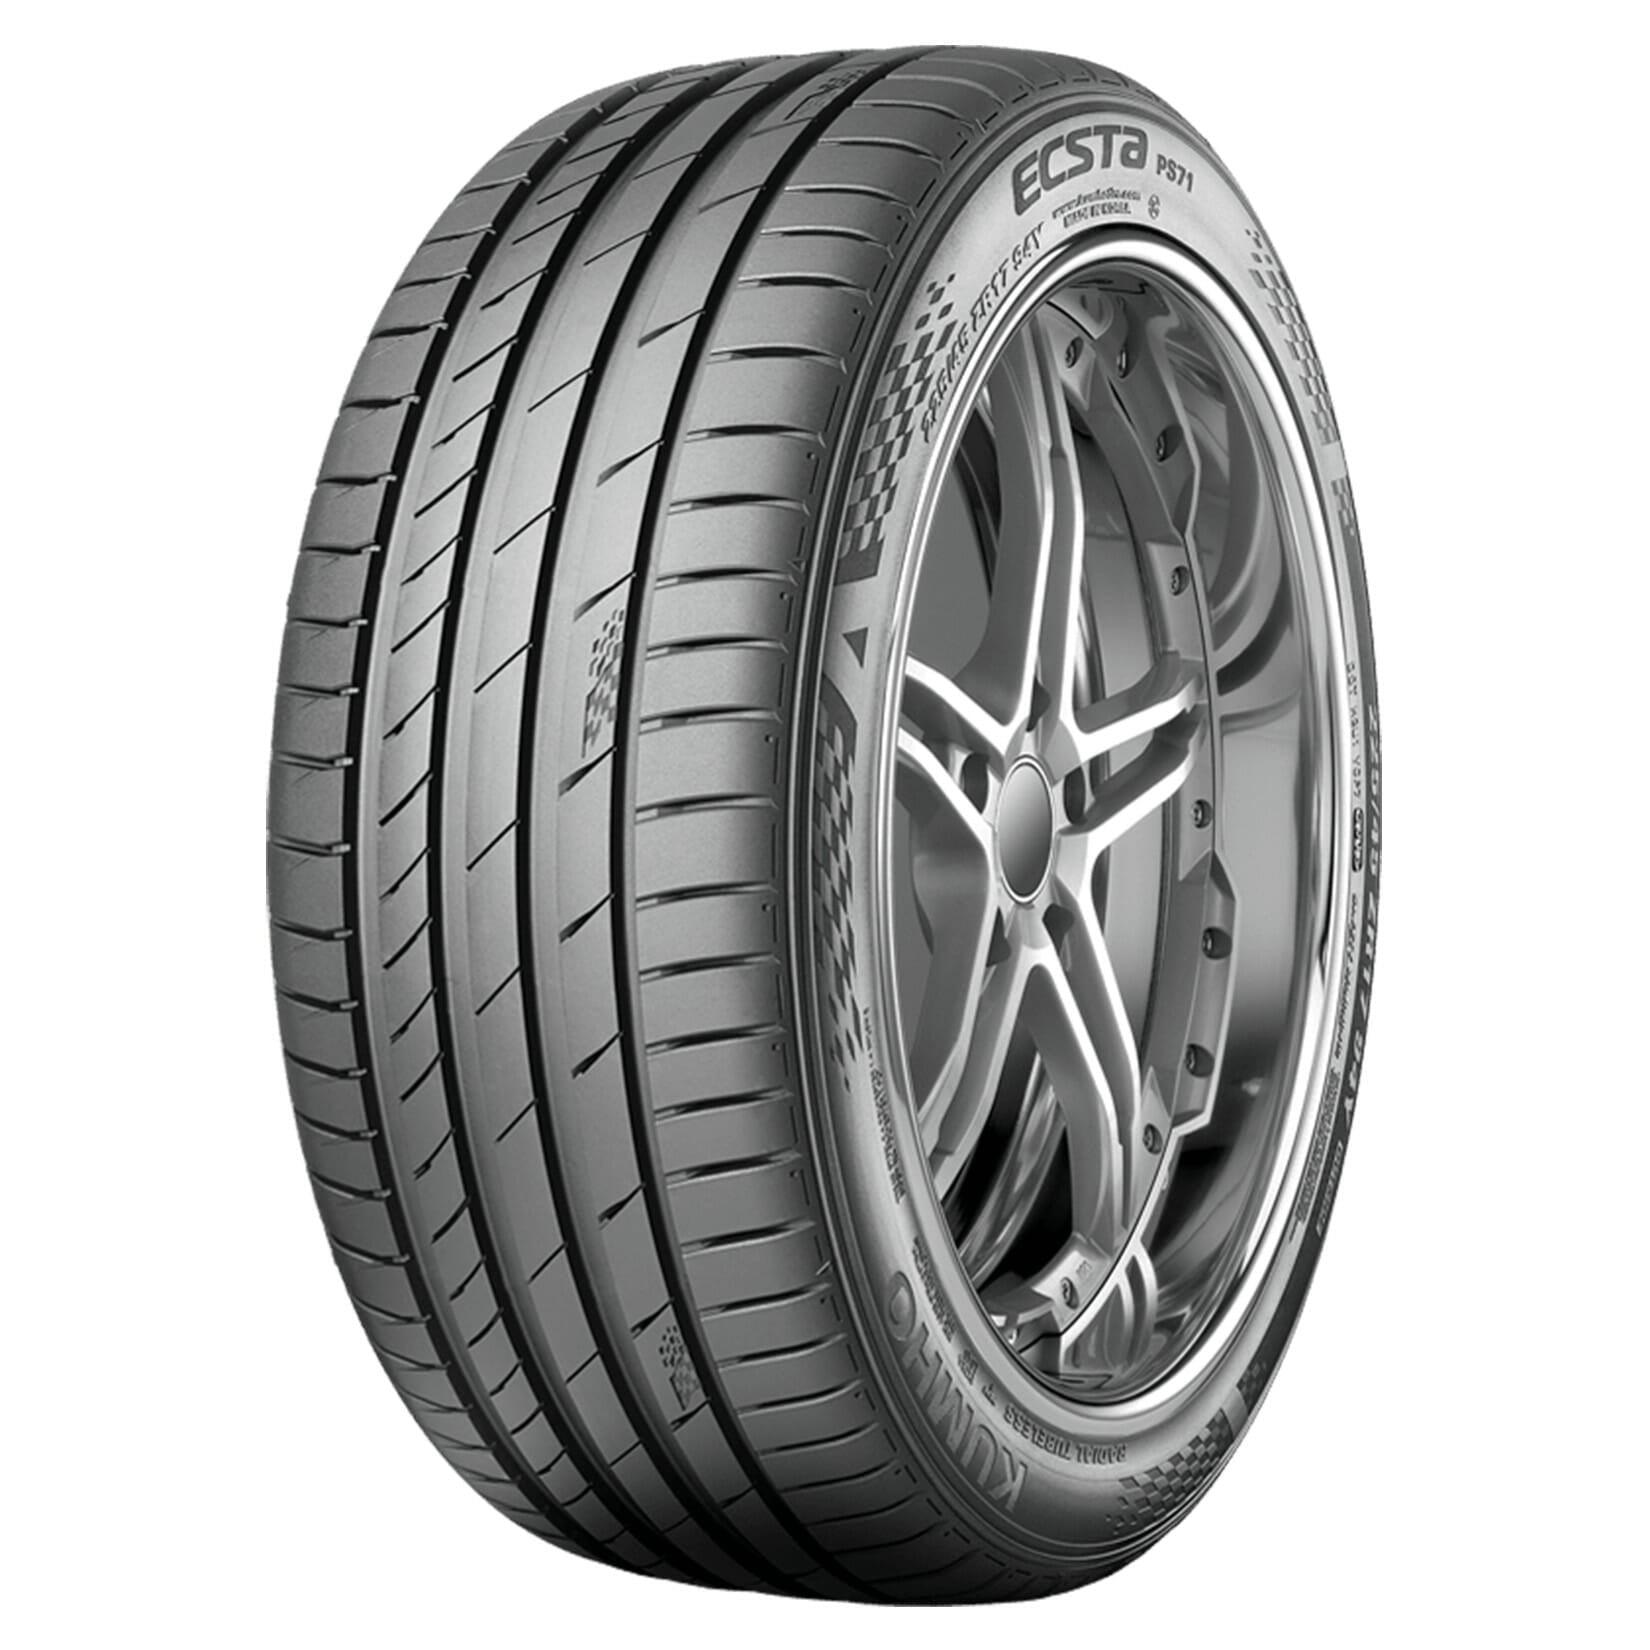 KUMHO SOLUS KH15 TYRE - 255/60/18 - Storm Xccessories2